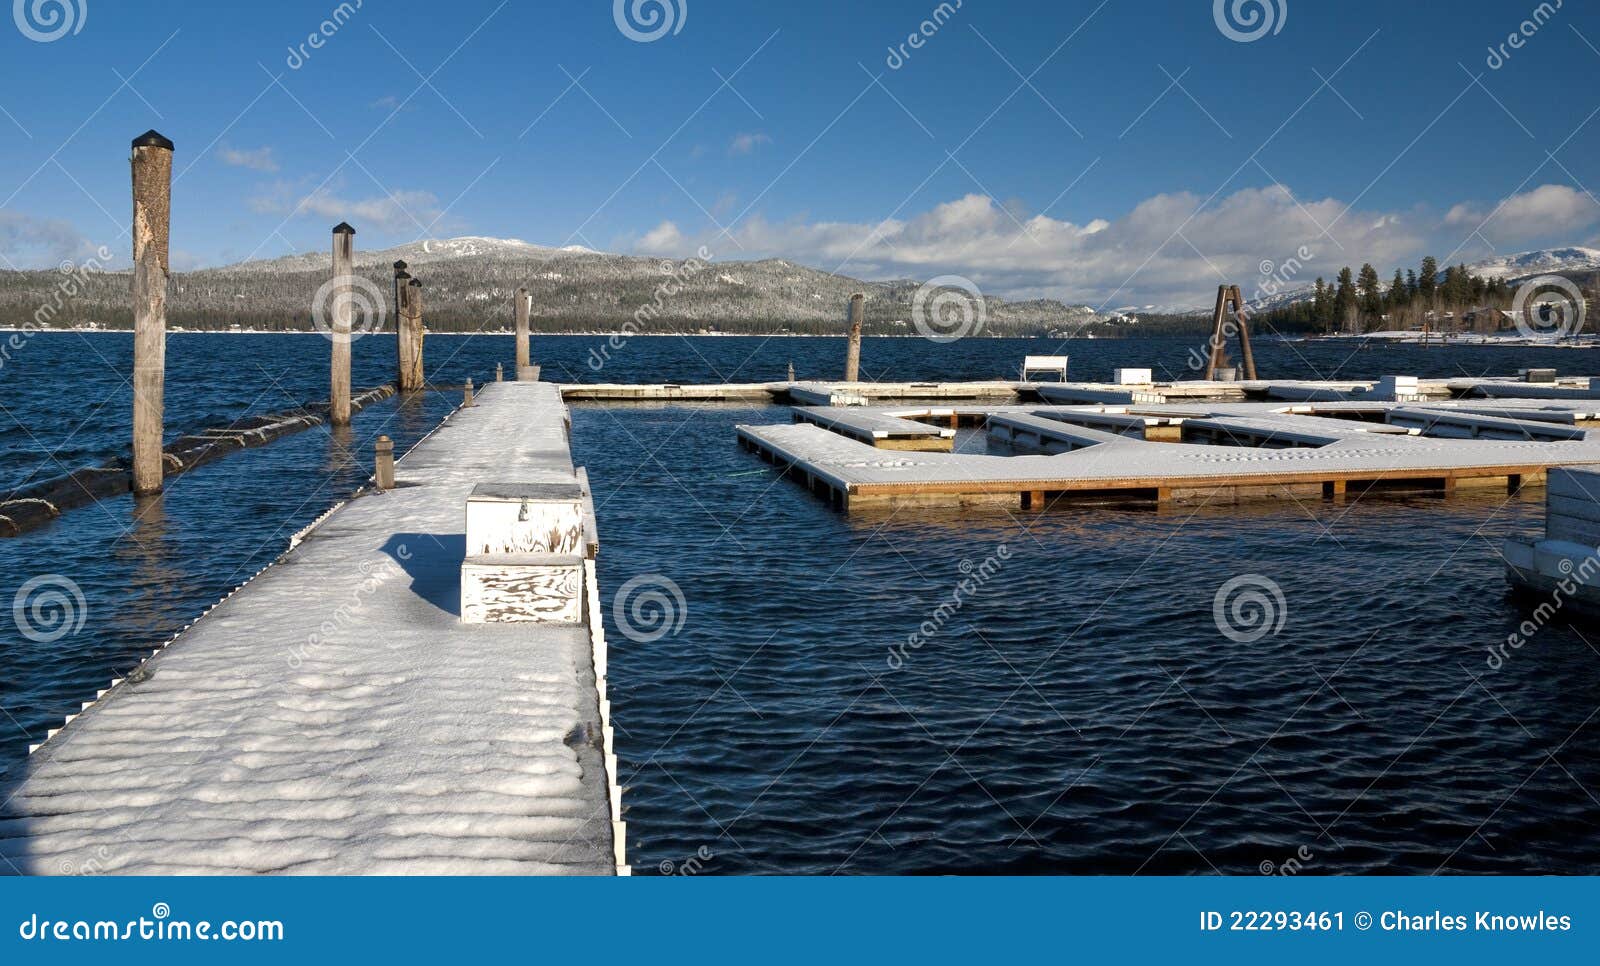 Boat Docks In Winter Covered With Snow Stock Image - Image: 22293461